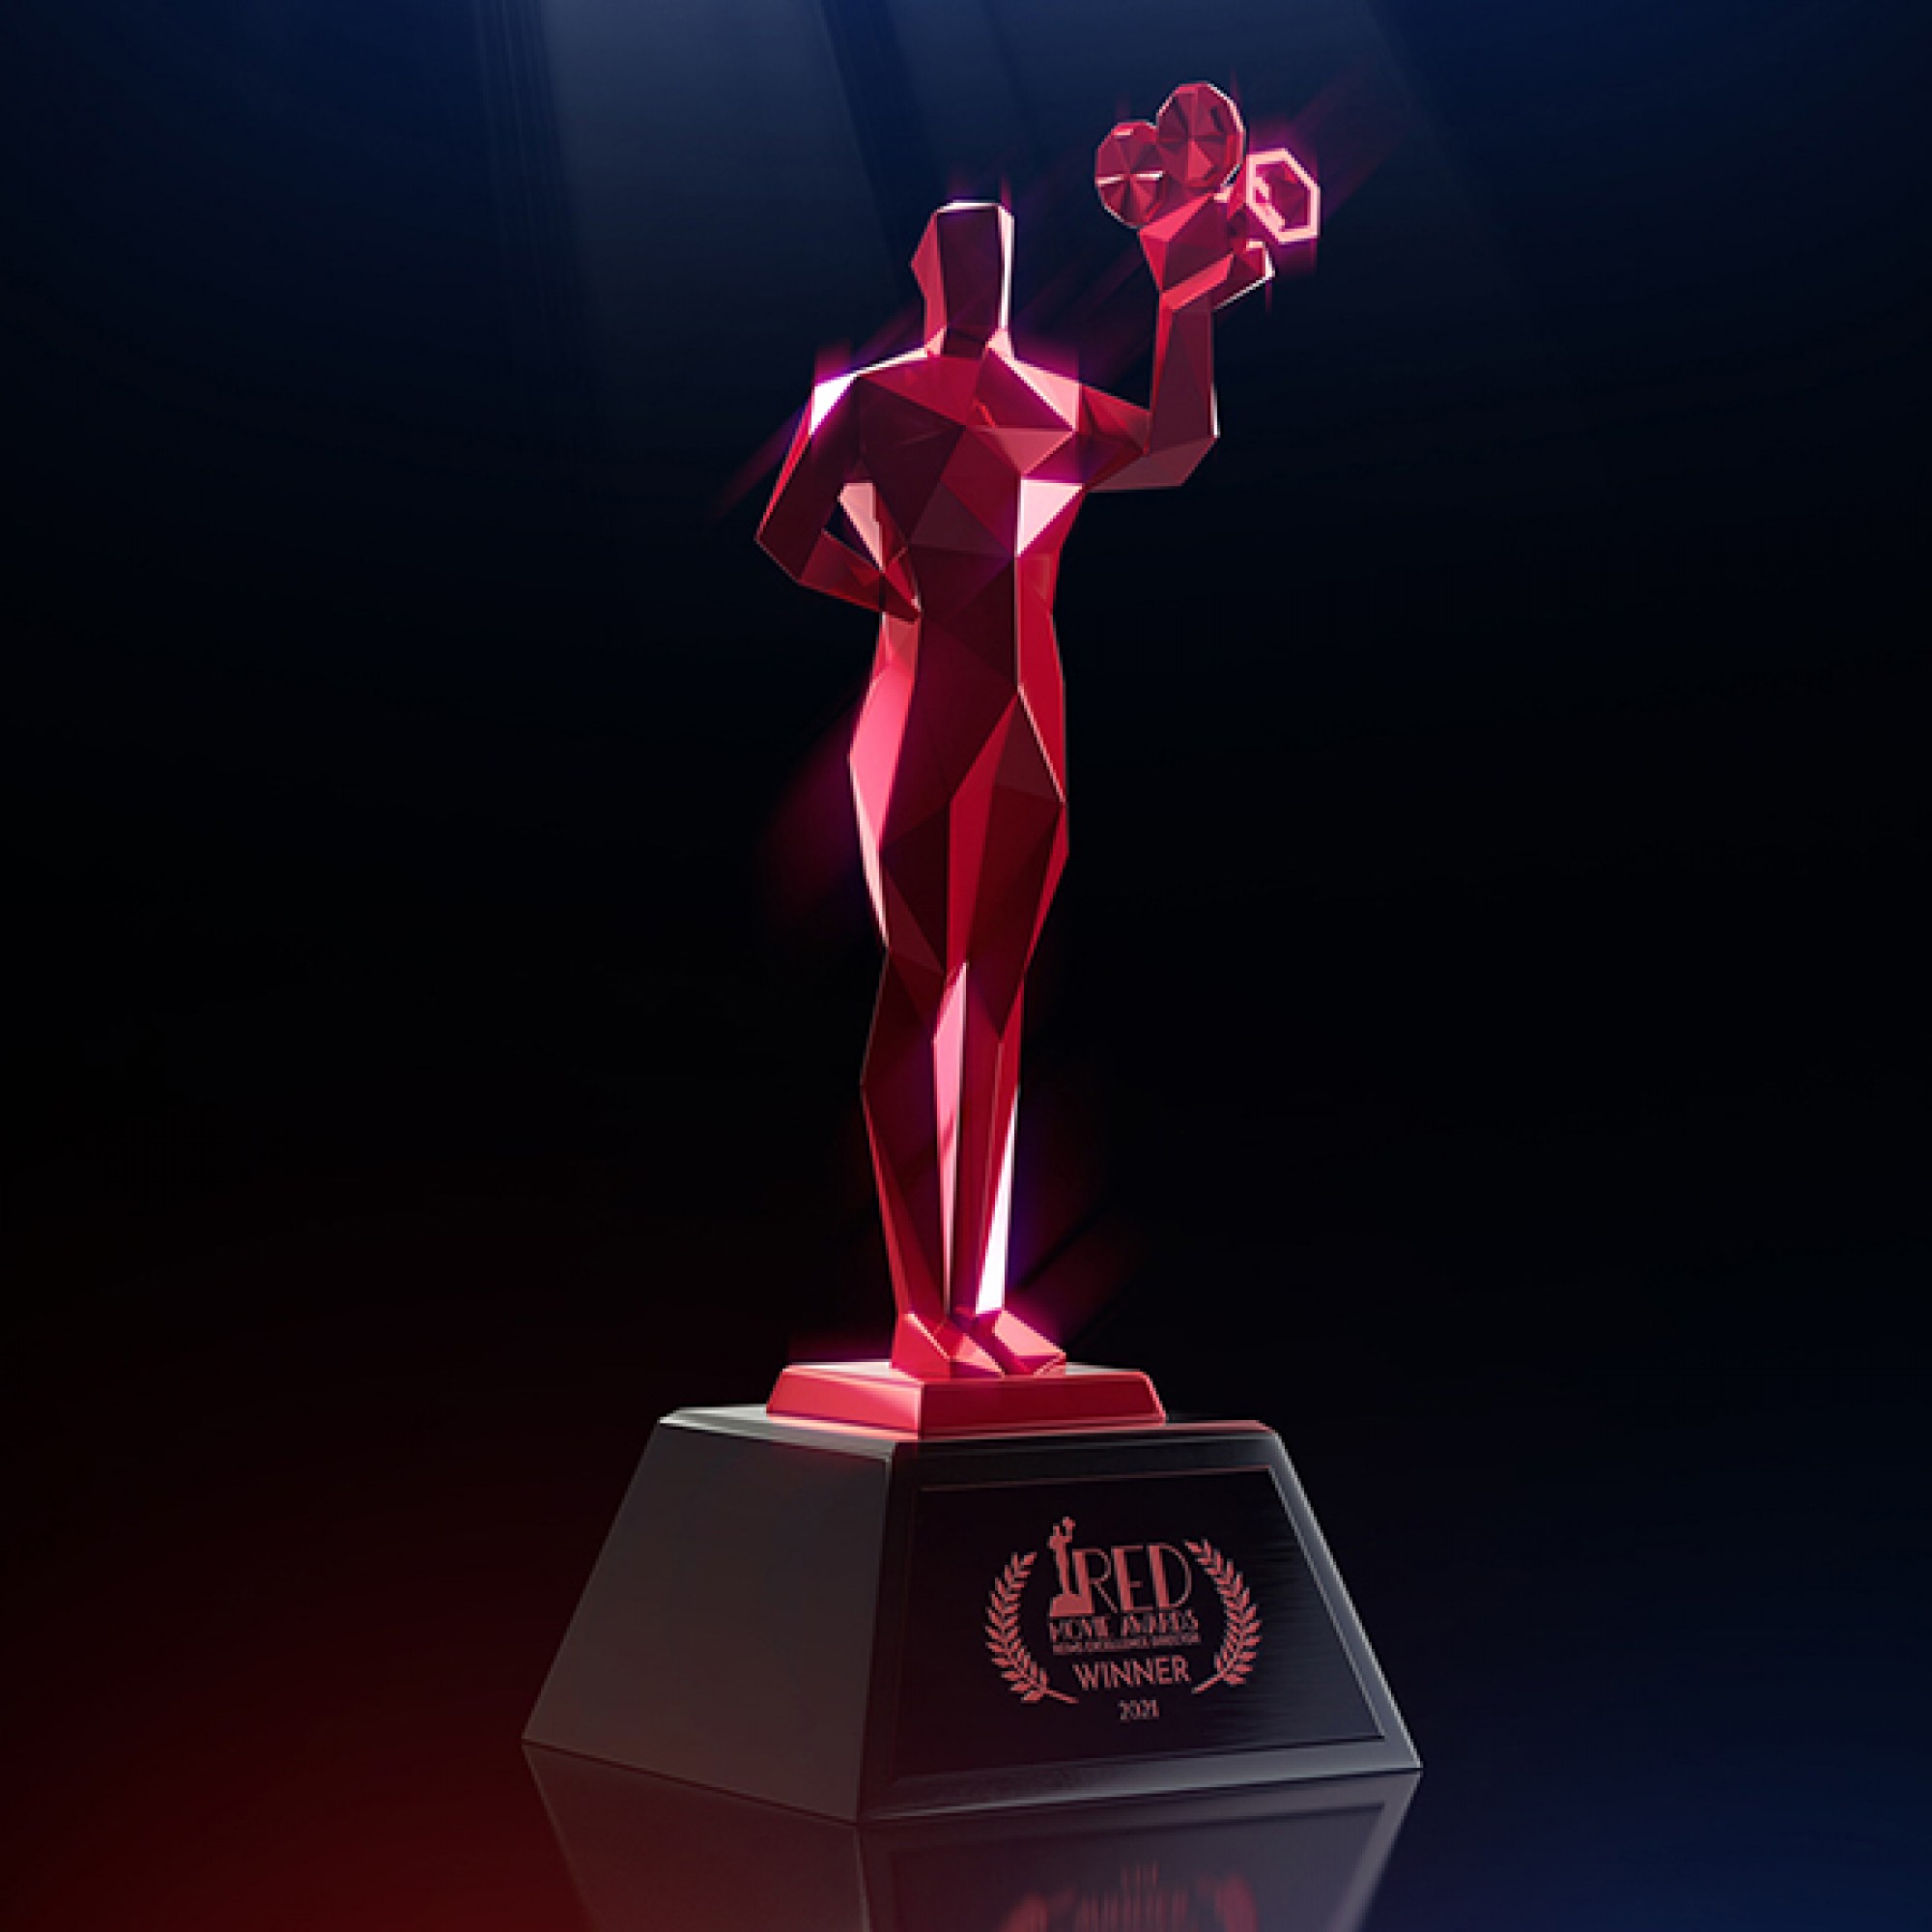 Beautiful statuette of the Red Movie Awards, made by the Society Awards known for its Youtube awards and the manufacture of the Emmy Award and the Golden Globe Award.